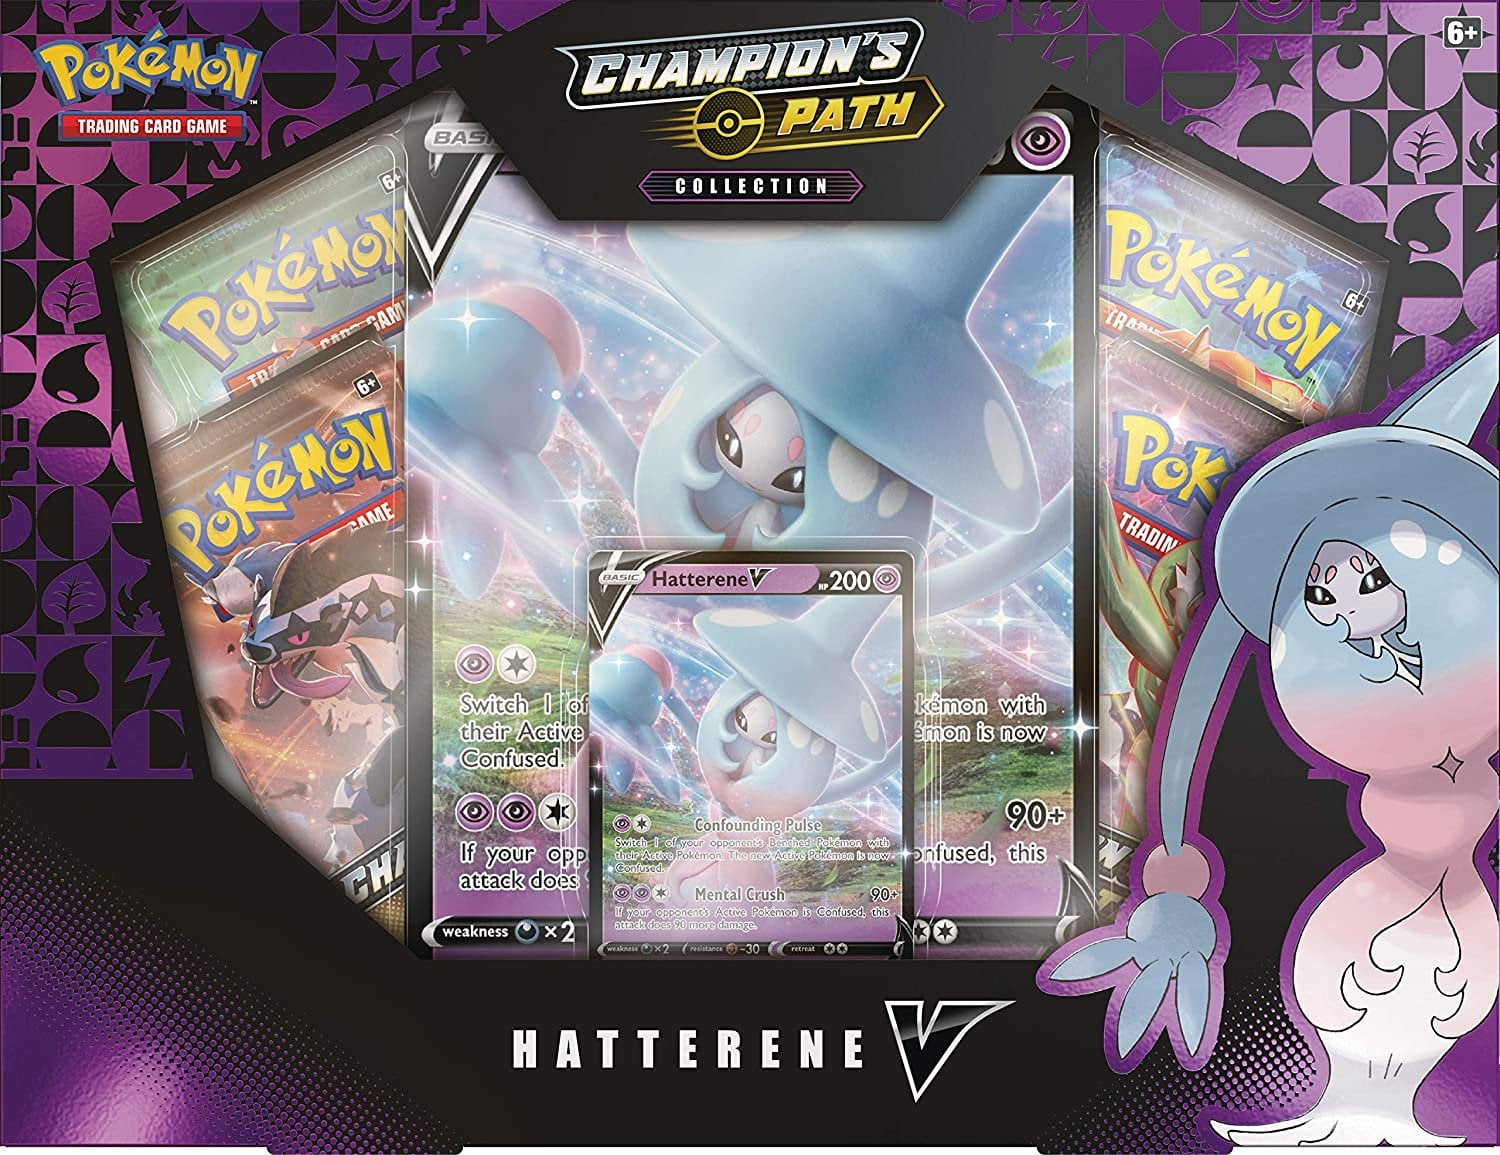 3x Pokemon Trading Card Game Champion's Path Collection Hatterene V for sale online 